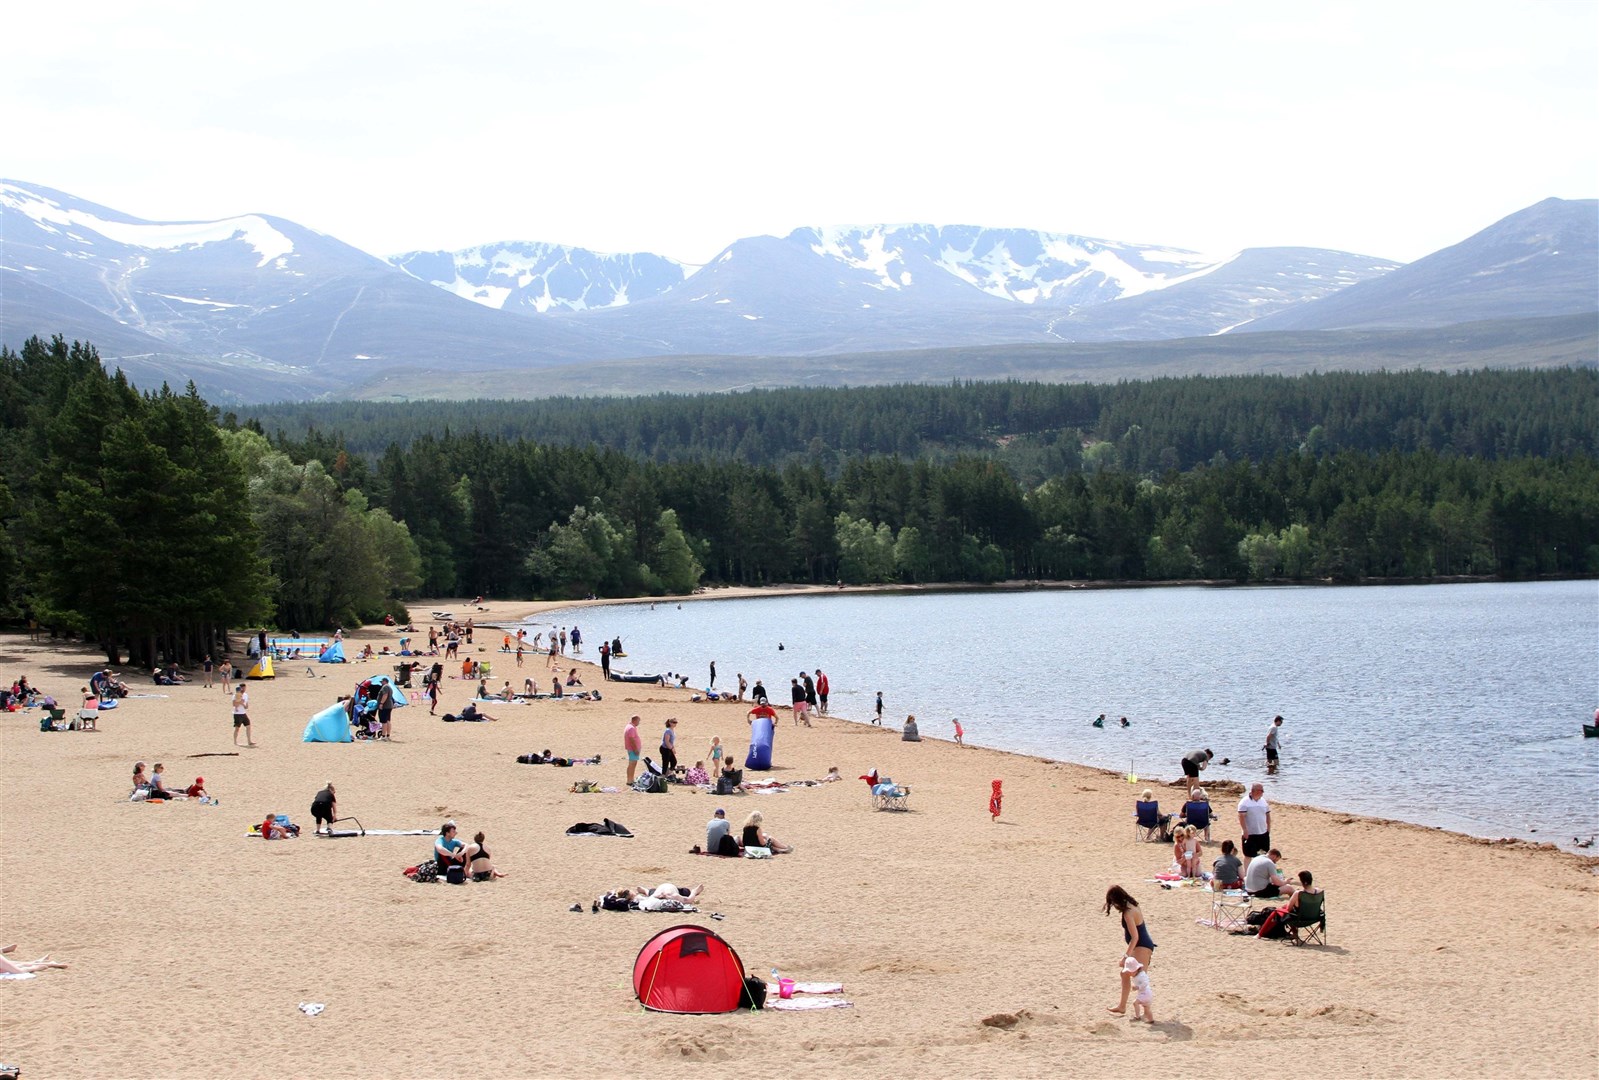 Loch Morlich beach topped the study's findings with the highest 'hashtagged' rating.